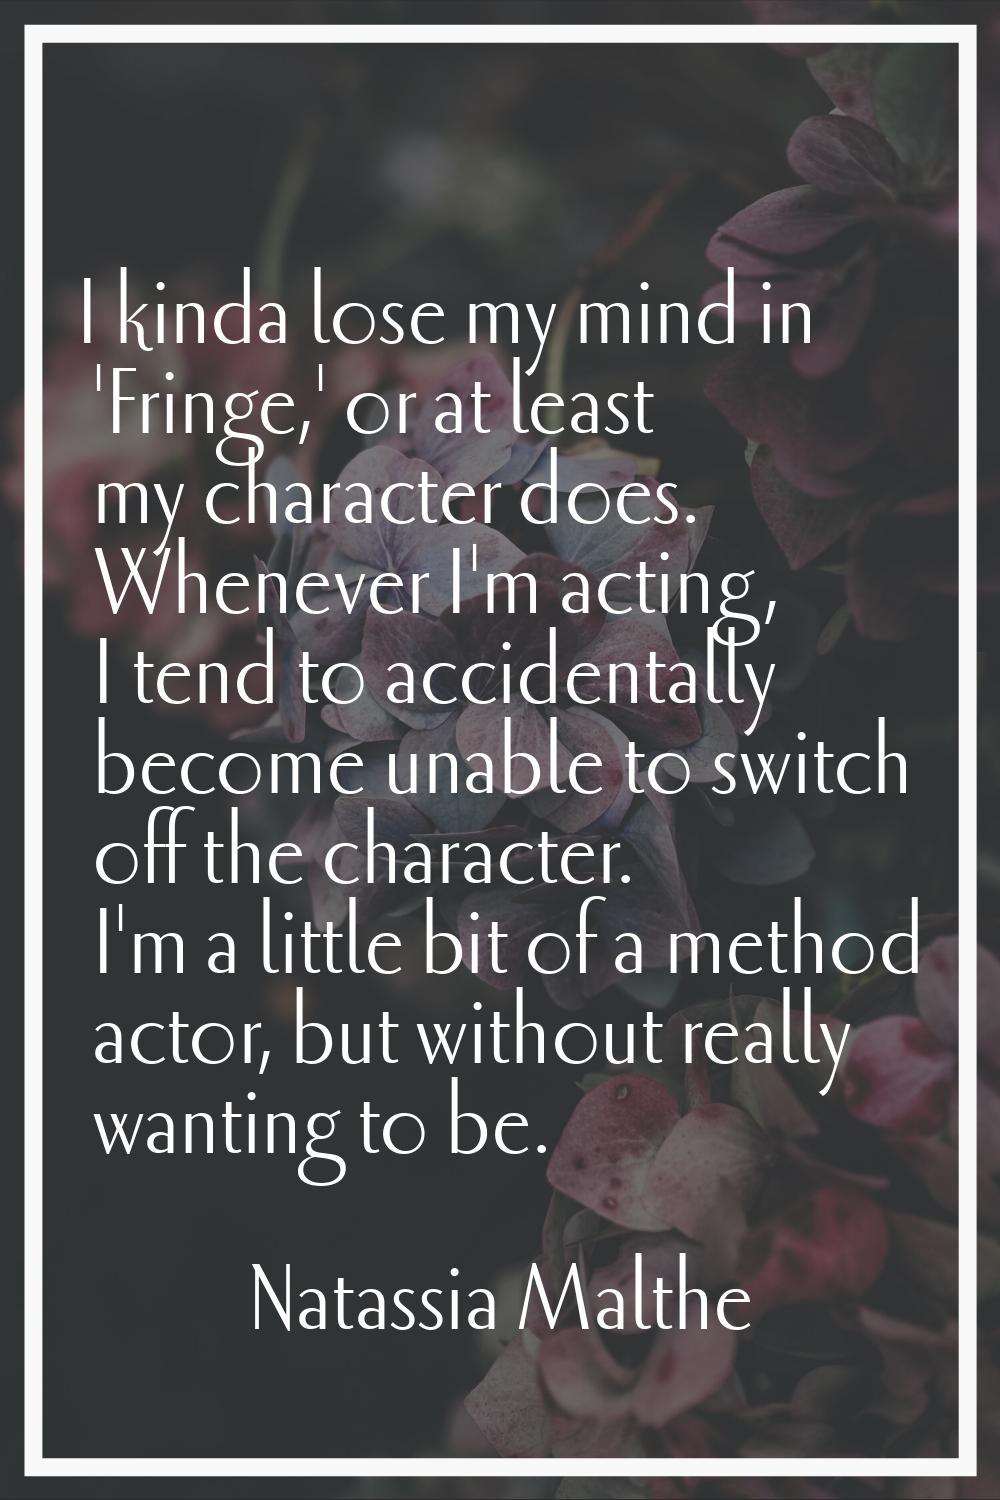 I kinda lose my mind in 'Fringe,' or at least my character does. Whenever I'm acting, I tend to acc